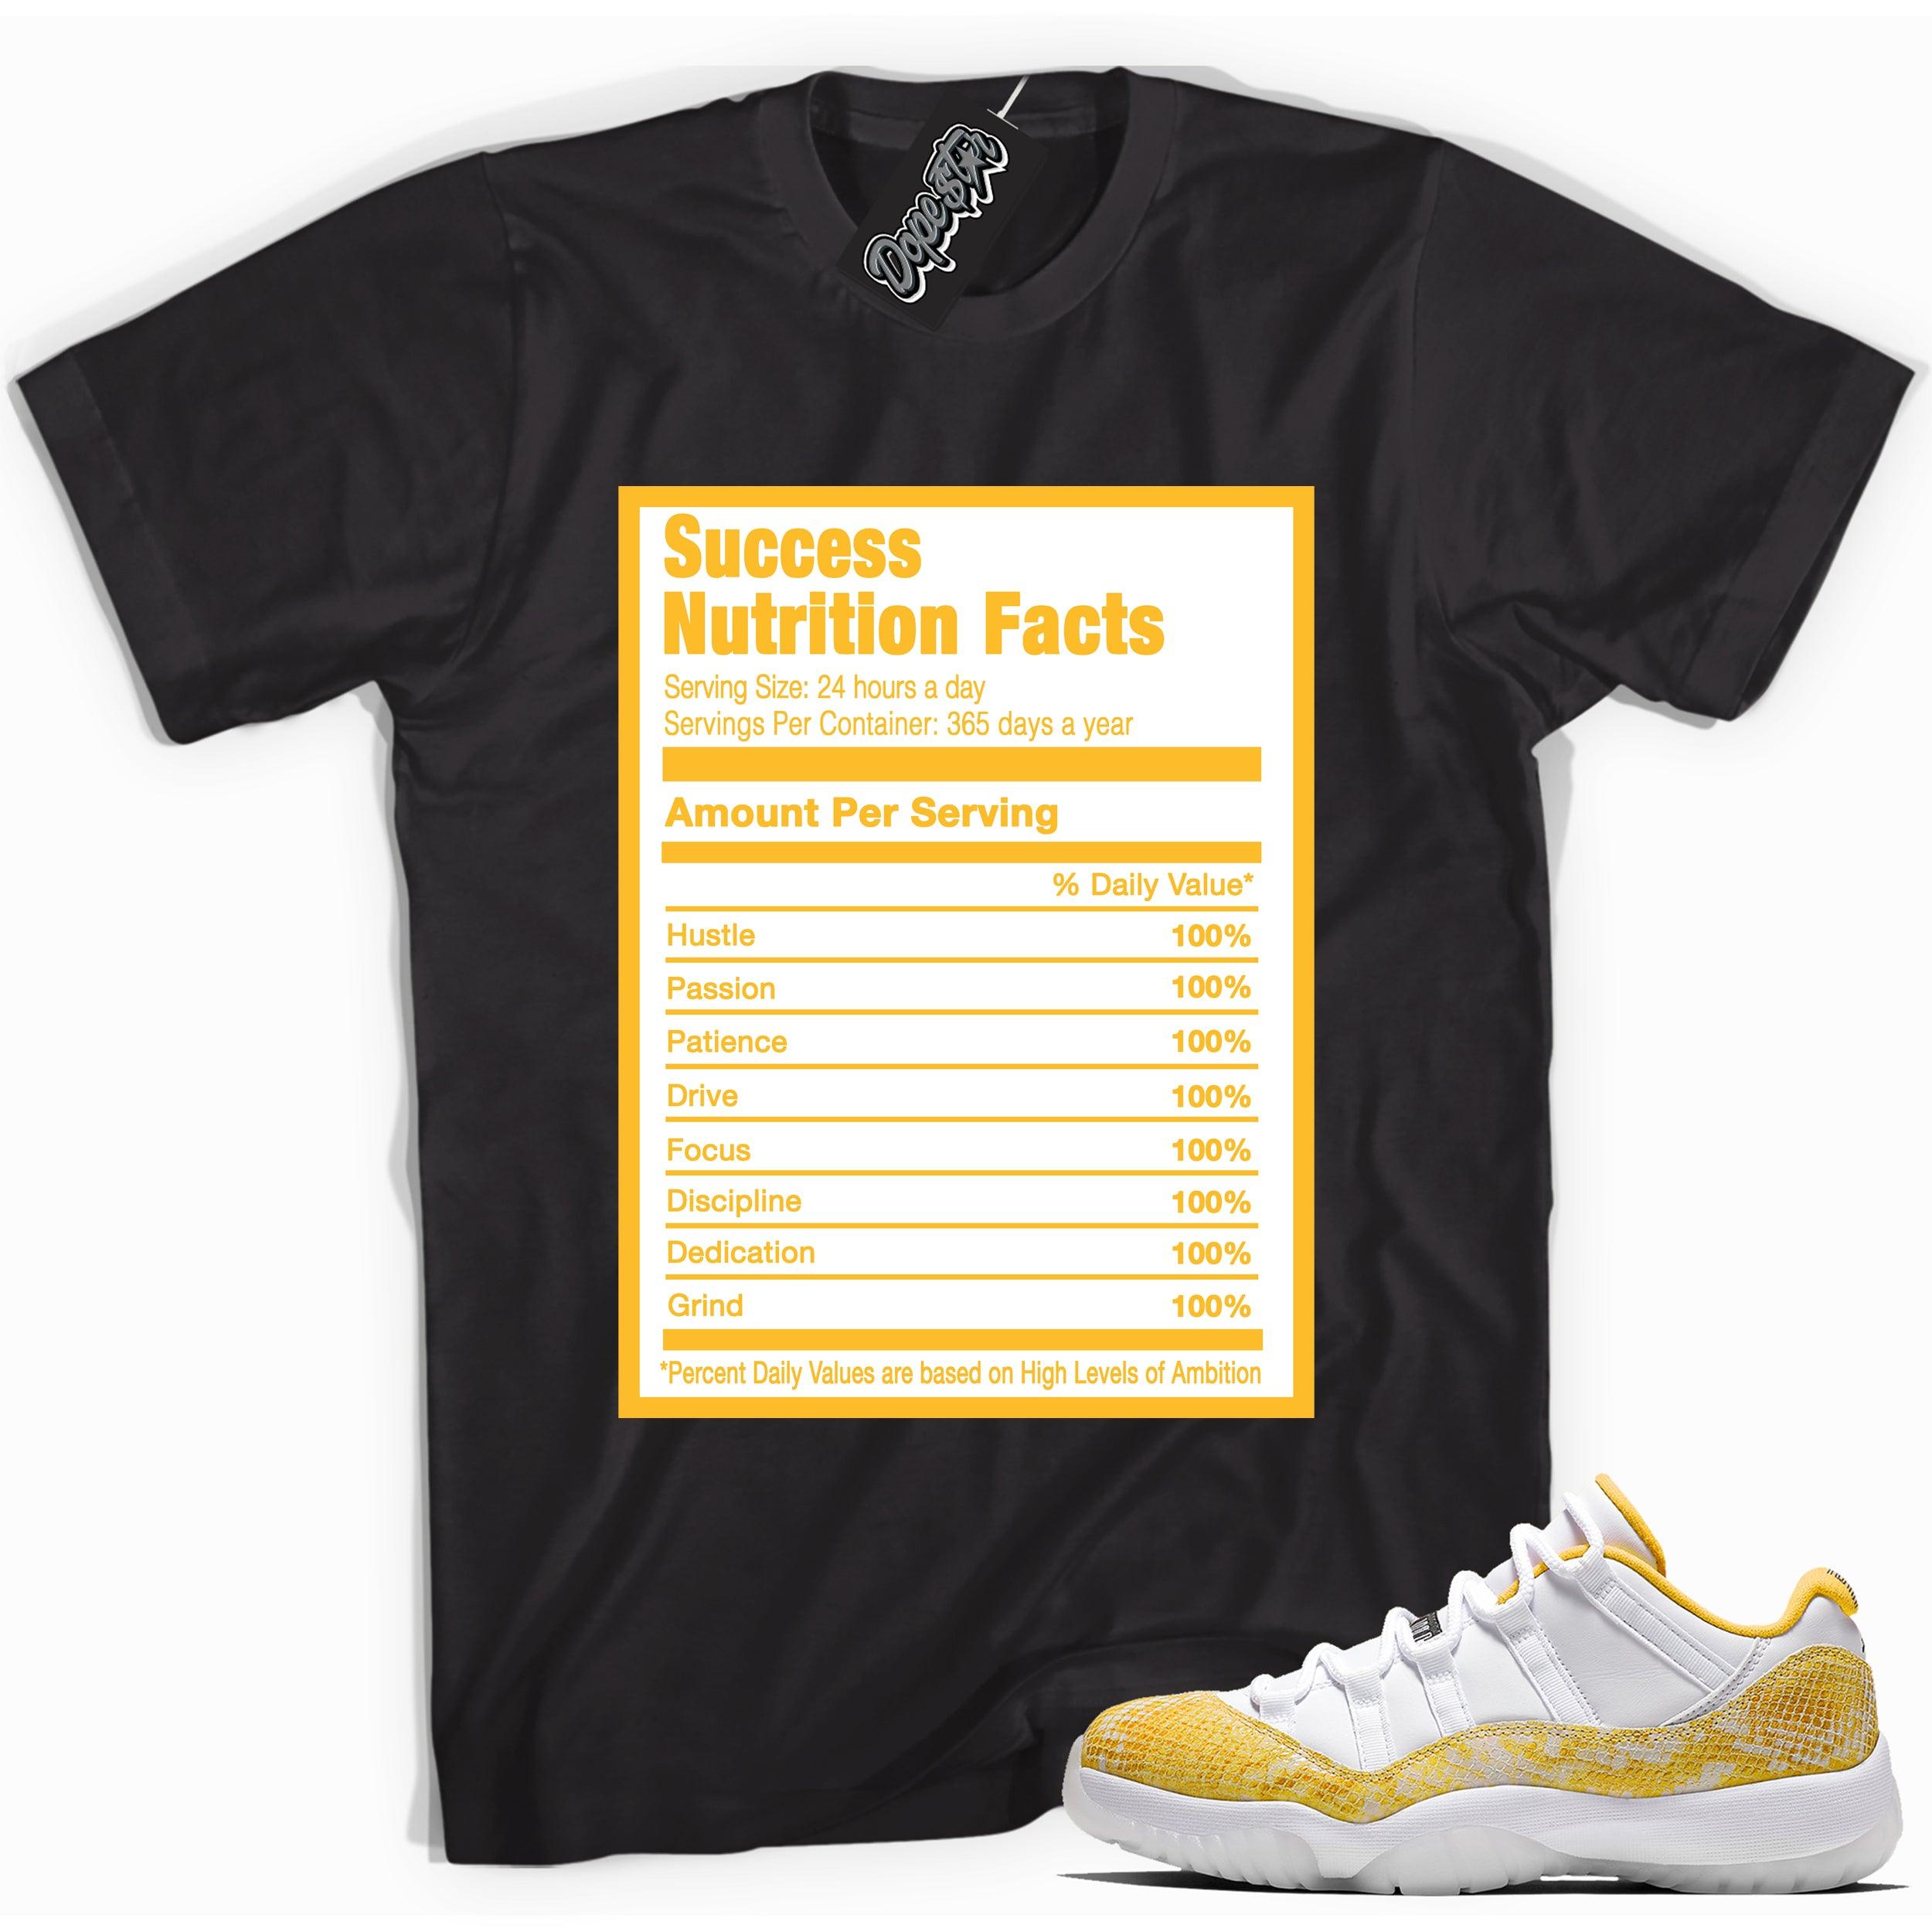 Cool black graphic tee with 'success nutrition facts' print, that perfectly matches  Air Jordan 11 Retro Low Yellow Snakeskin sneakers